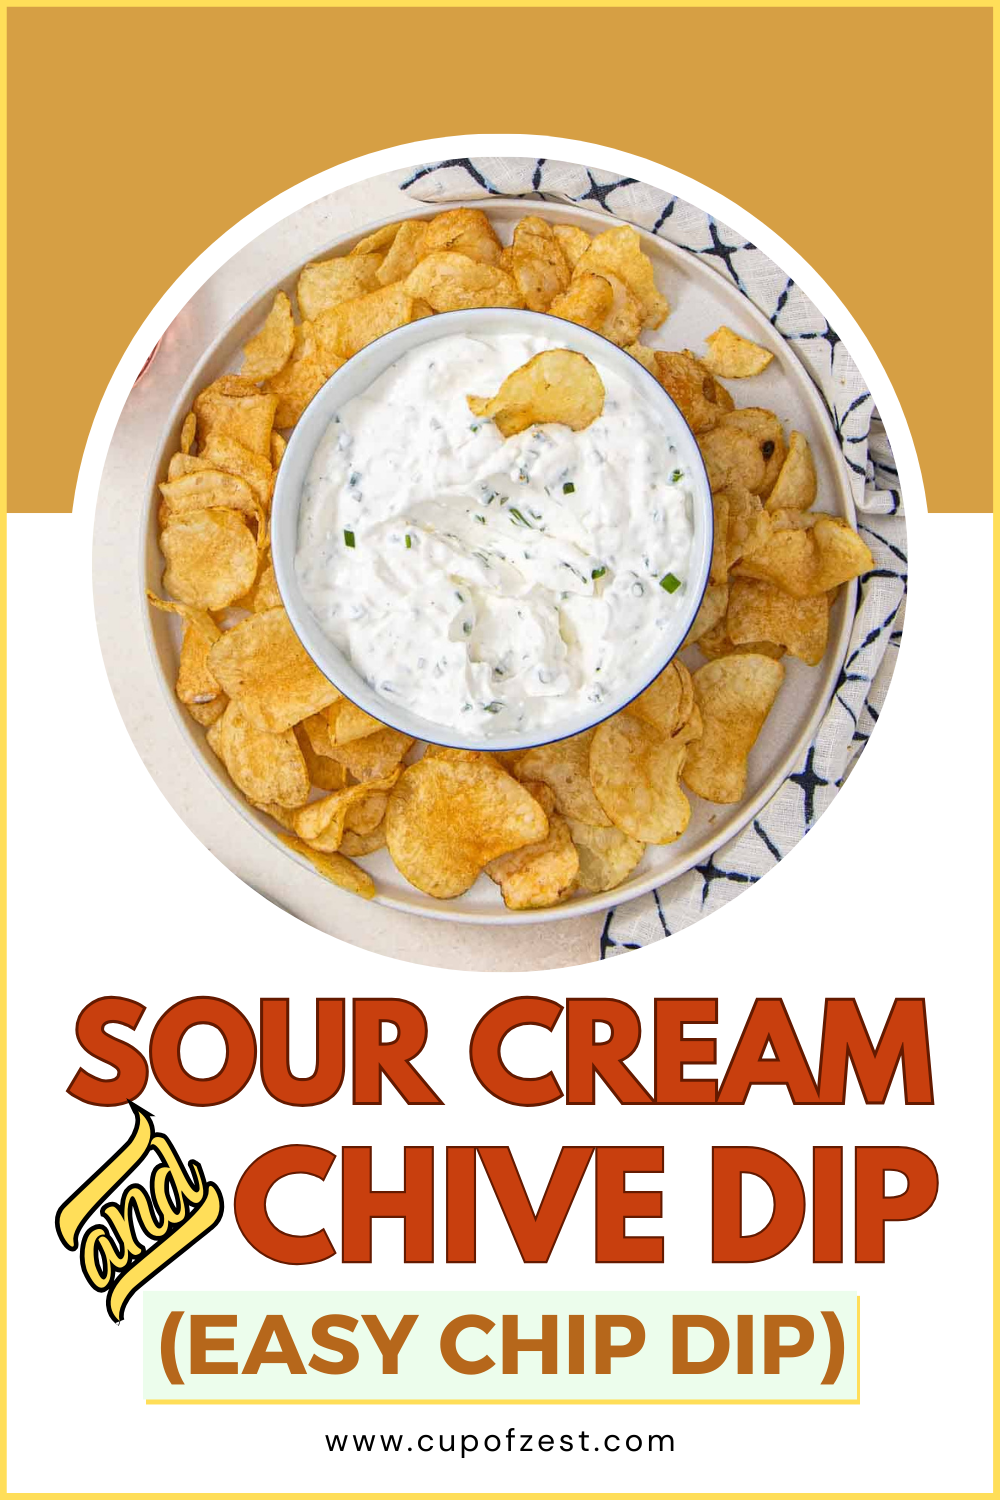 a bowl of dip on a plate of potato chips